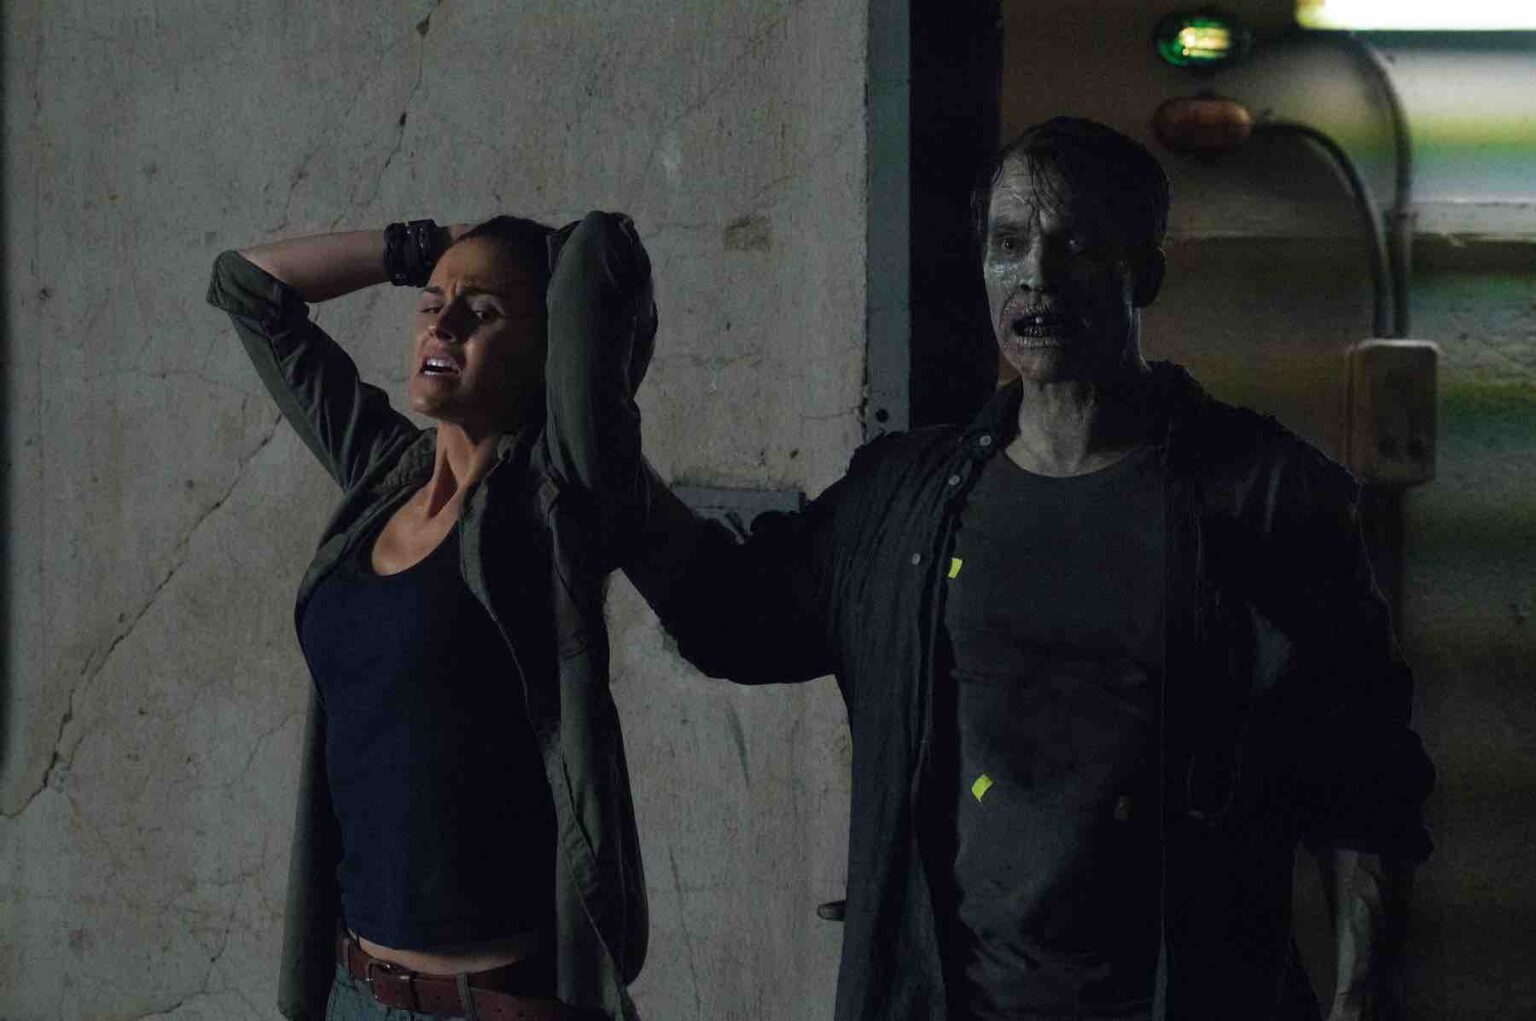 Desperate to fulfill your zombie movie craving? Gnaw on some brain with these Netflix zombie movies.